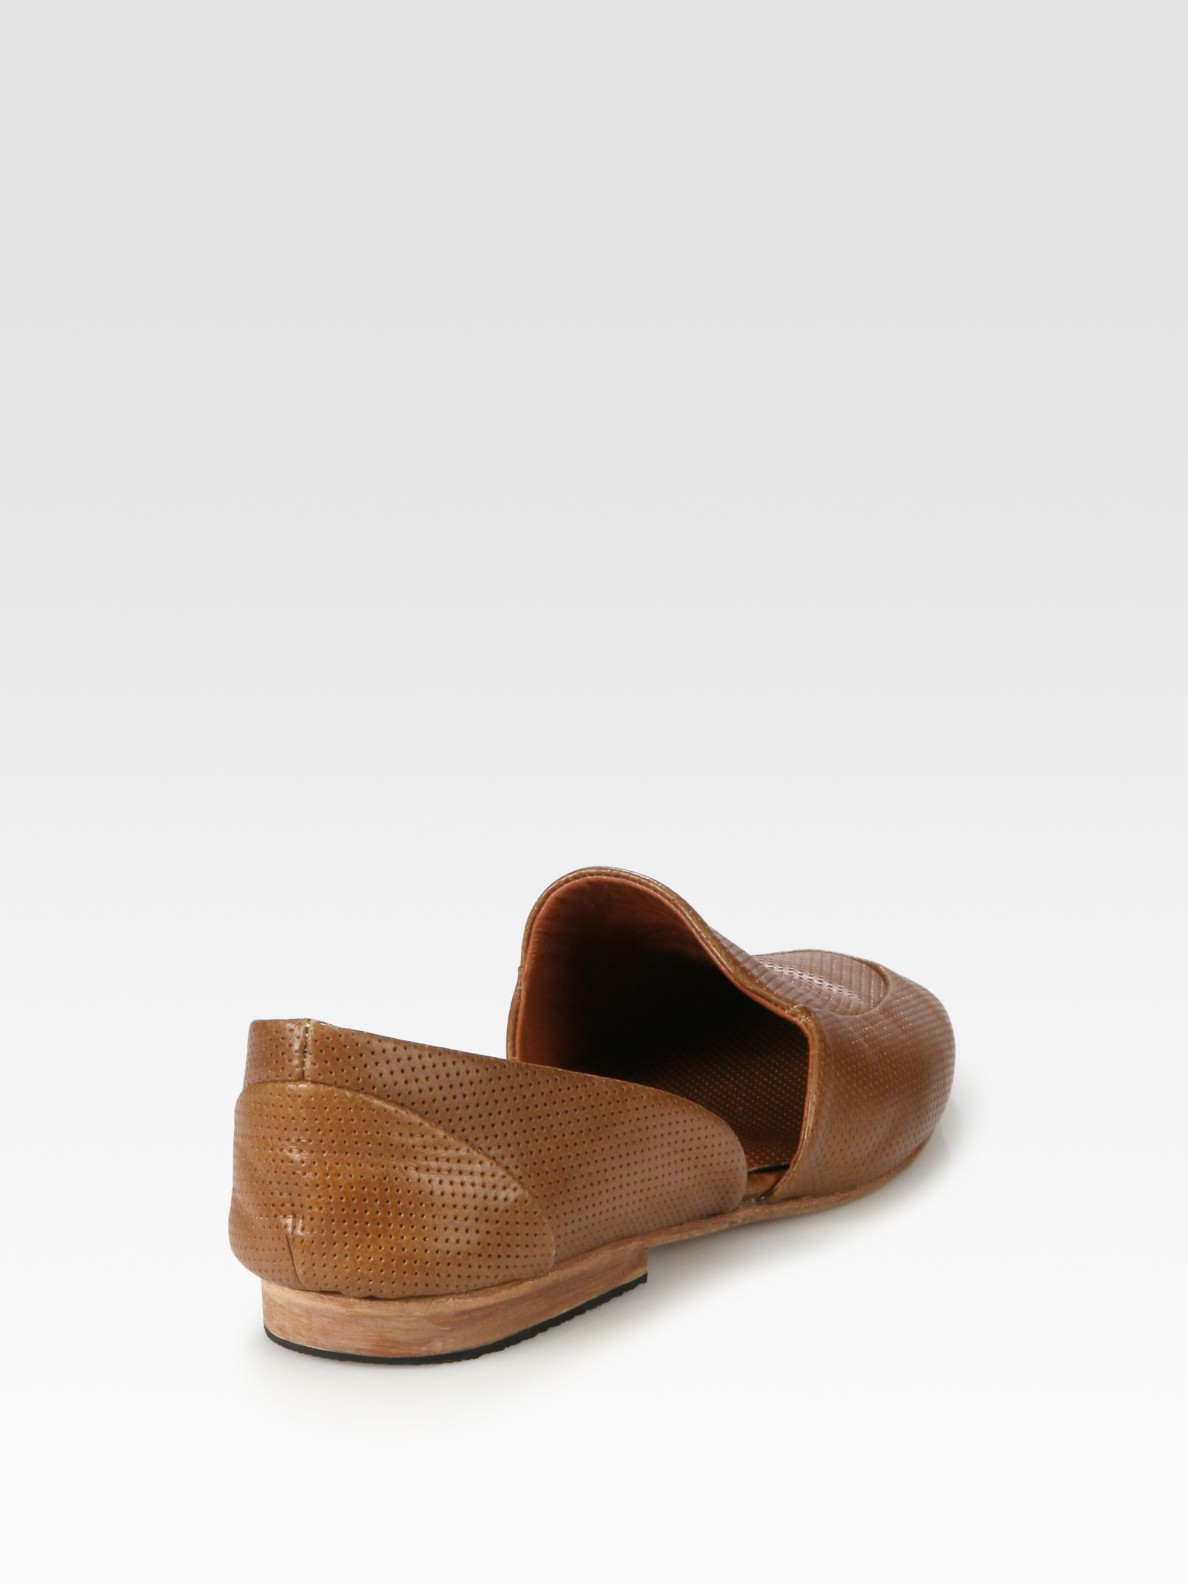 cut loafer shoes